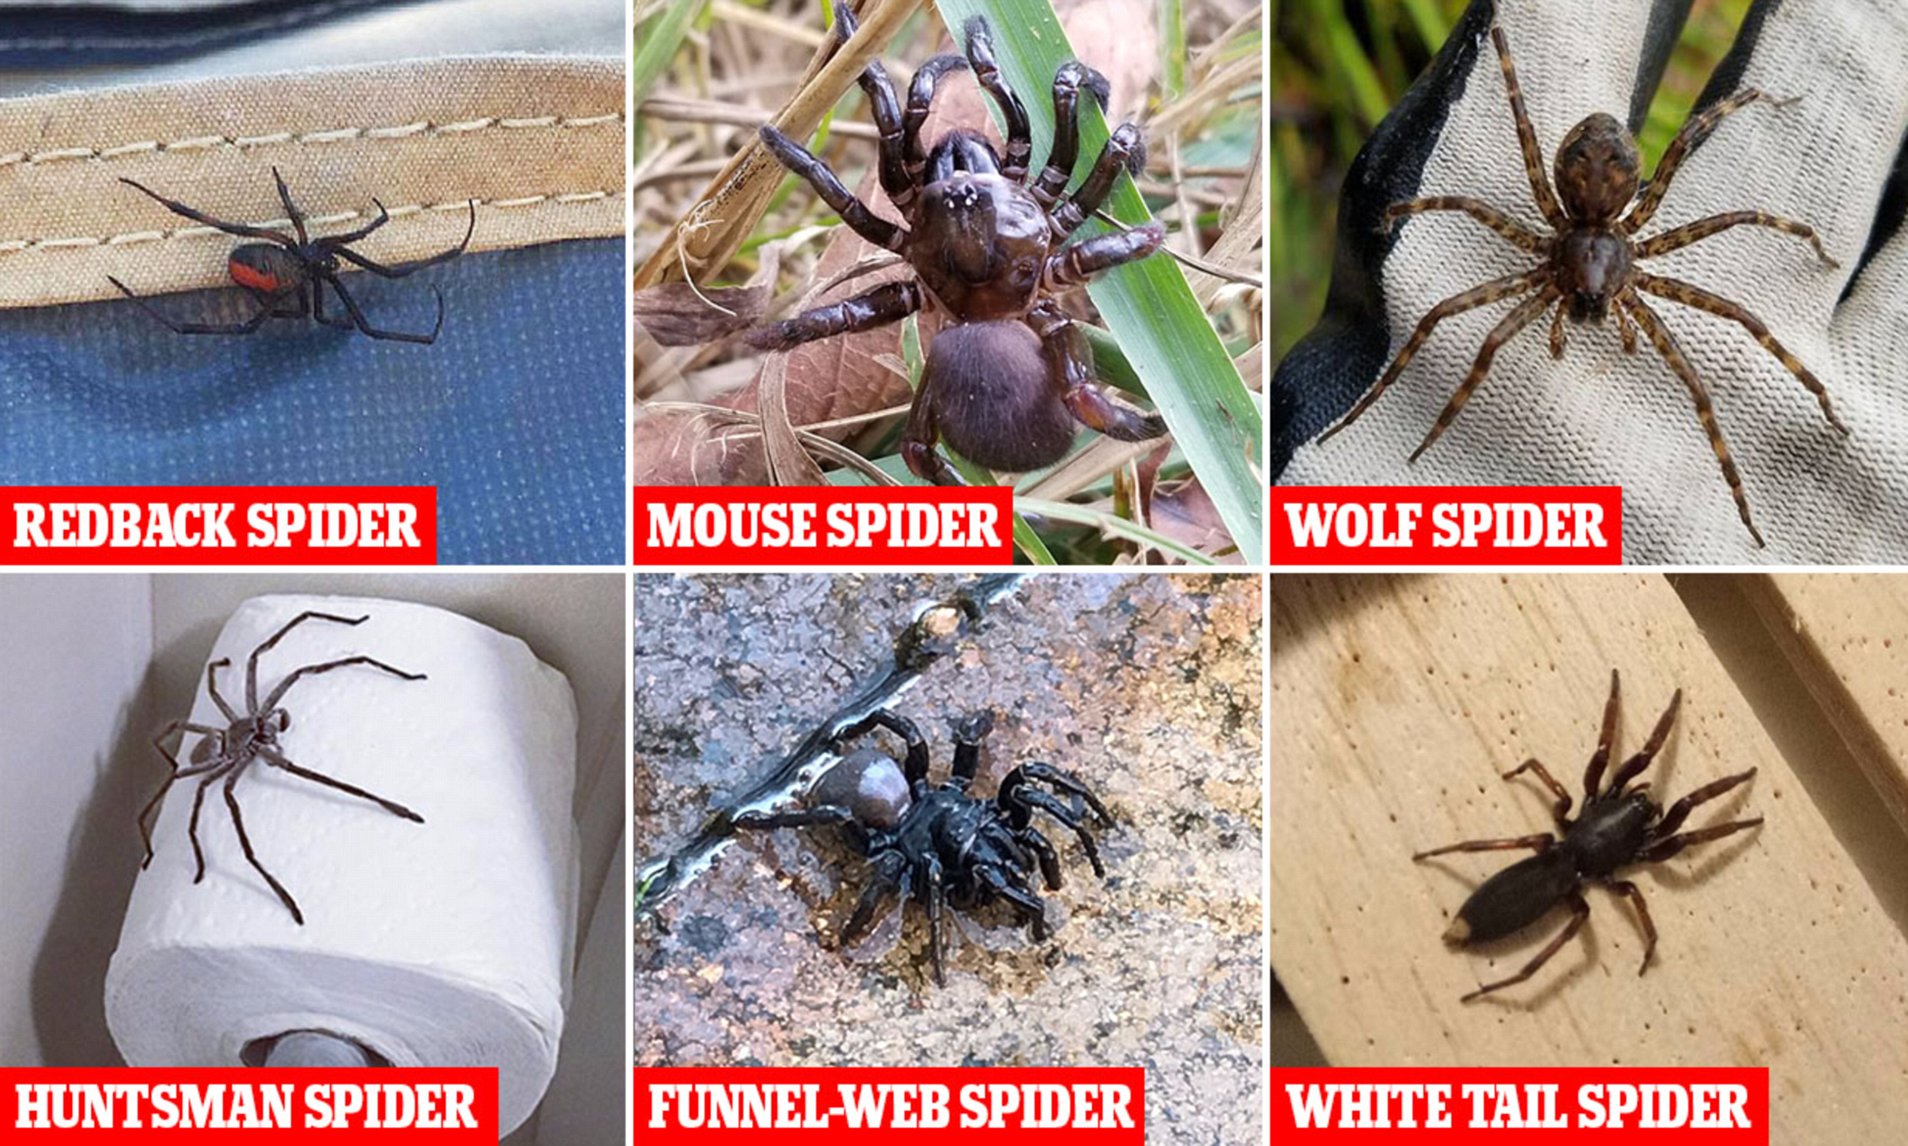 What type of spiders can kill you?